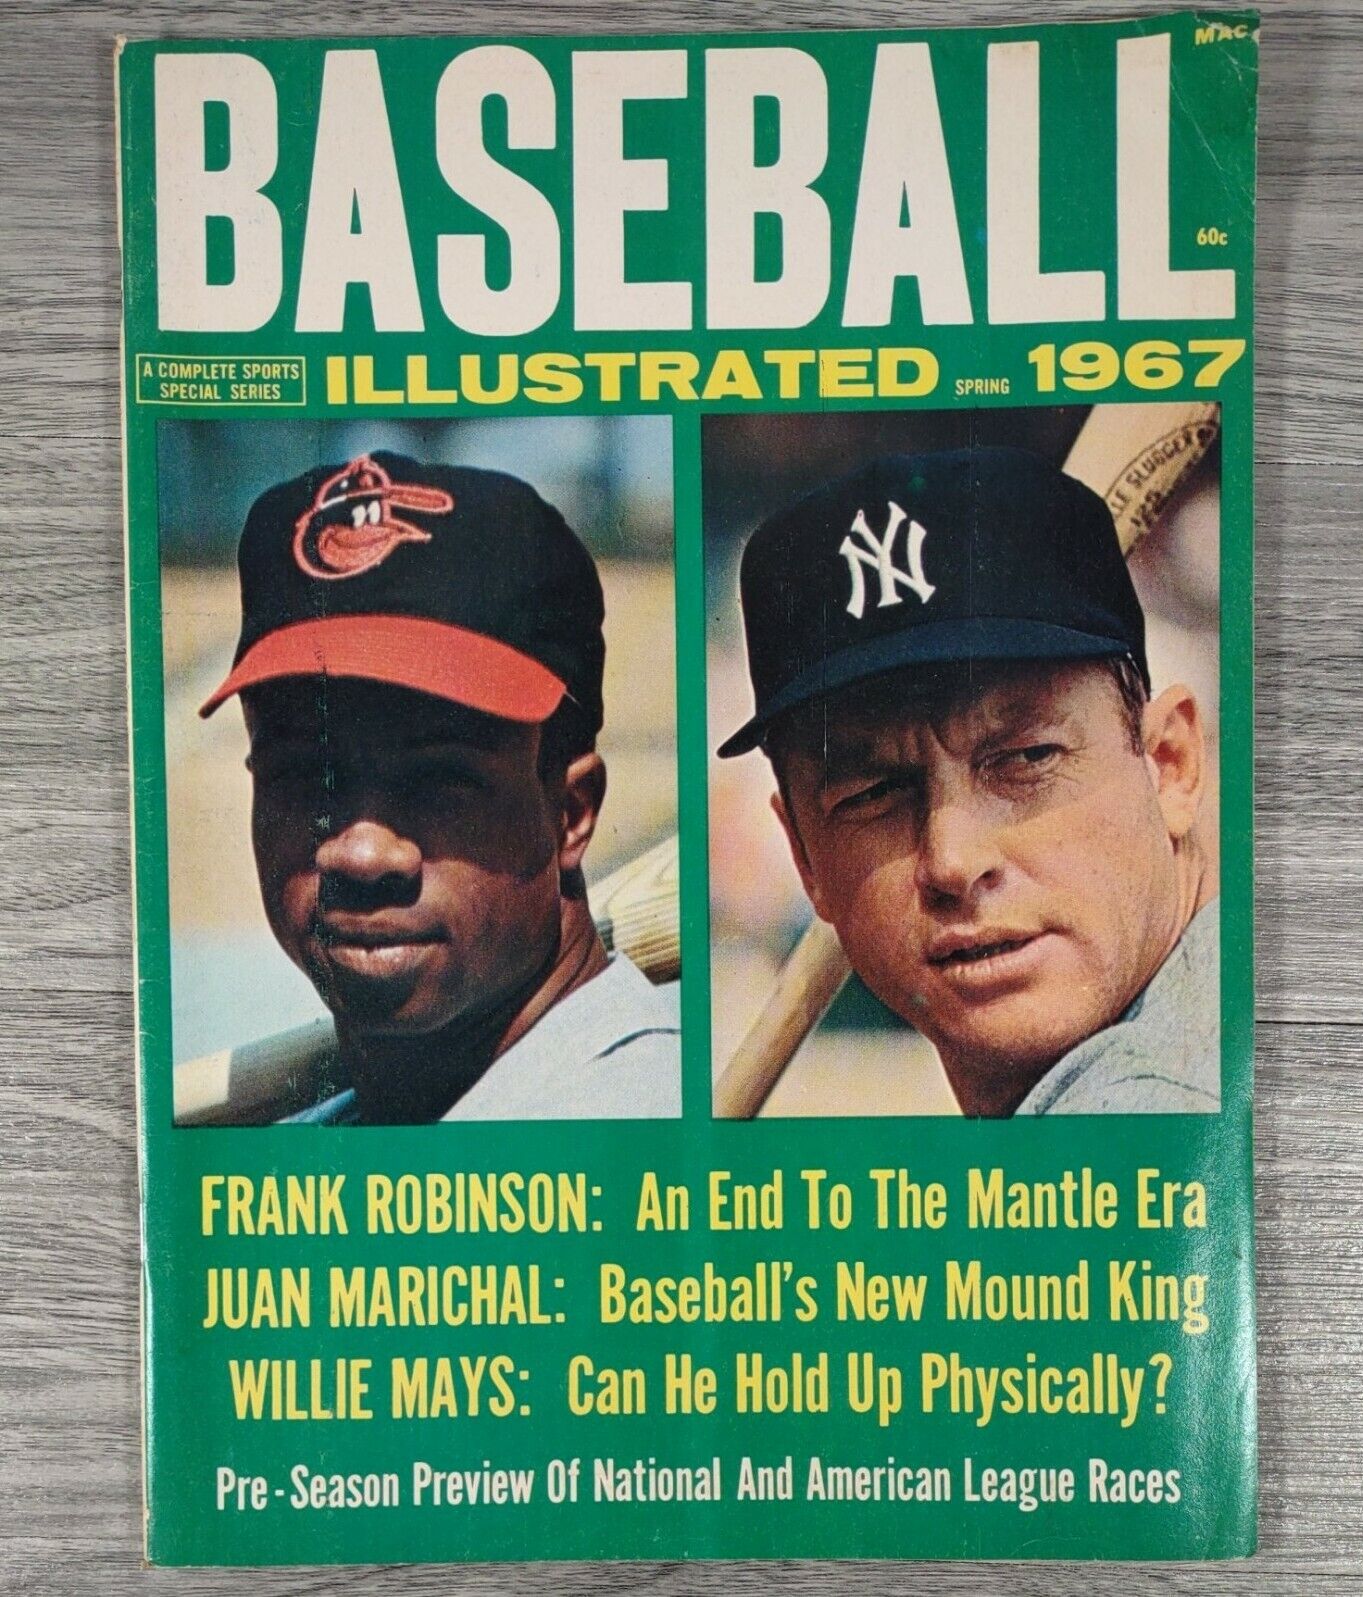 1967 BASEBALL ILLUSTRATED WITH MICKEY MANTLE & FRANK ROBINSON ON